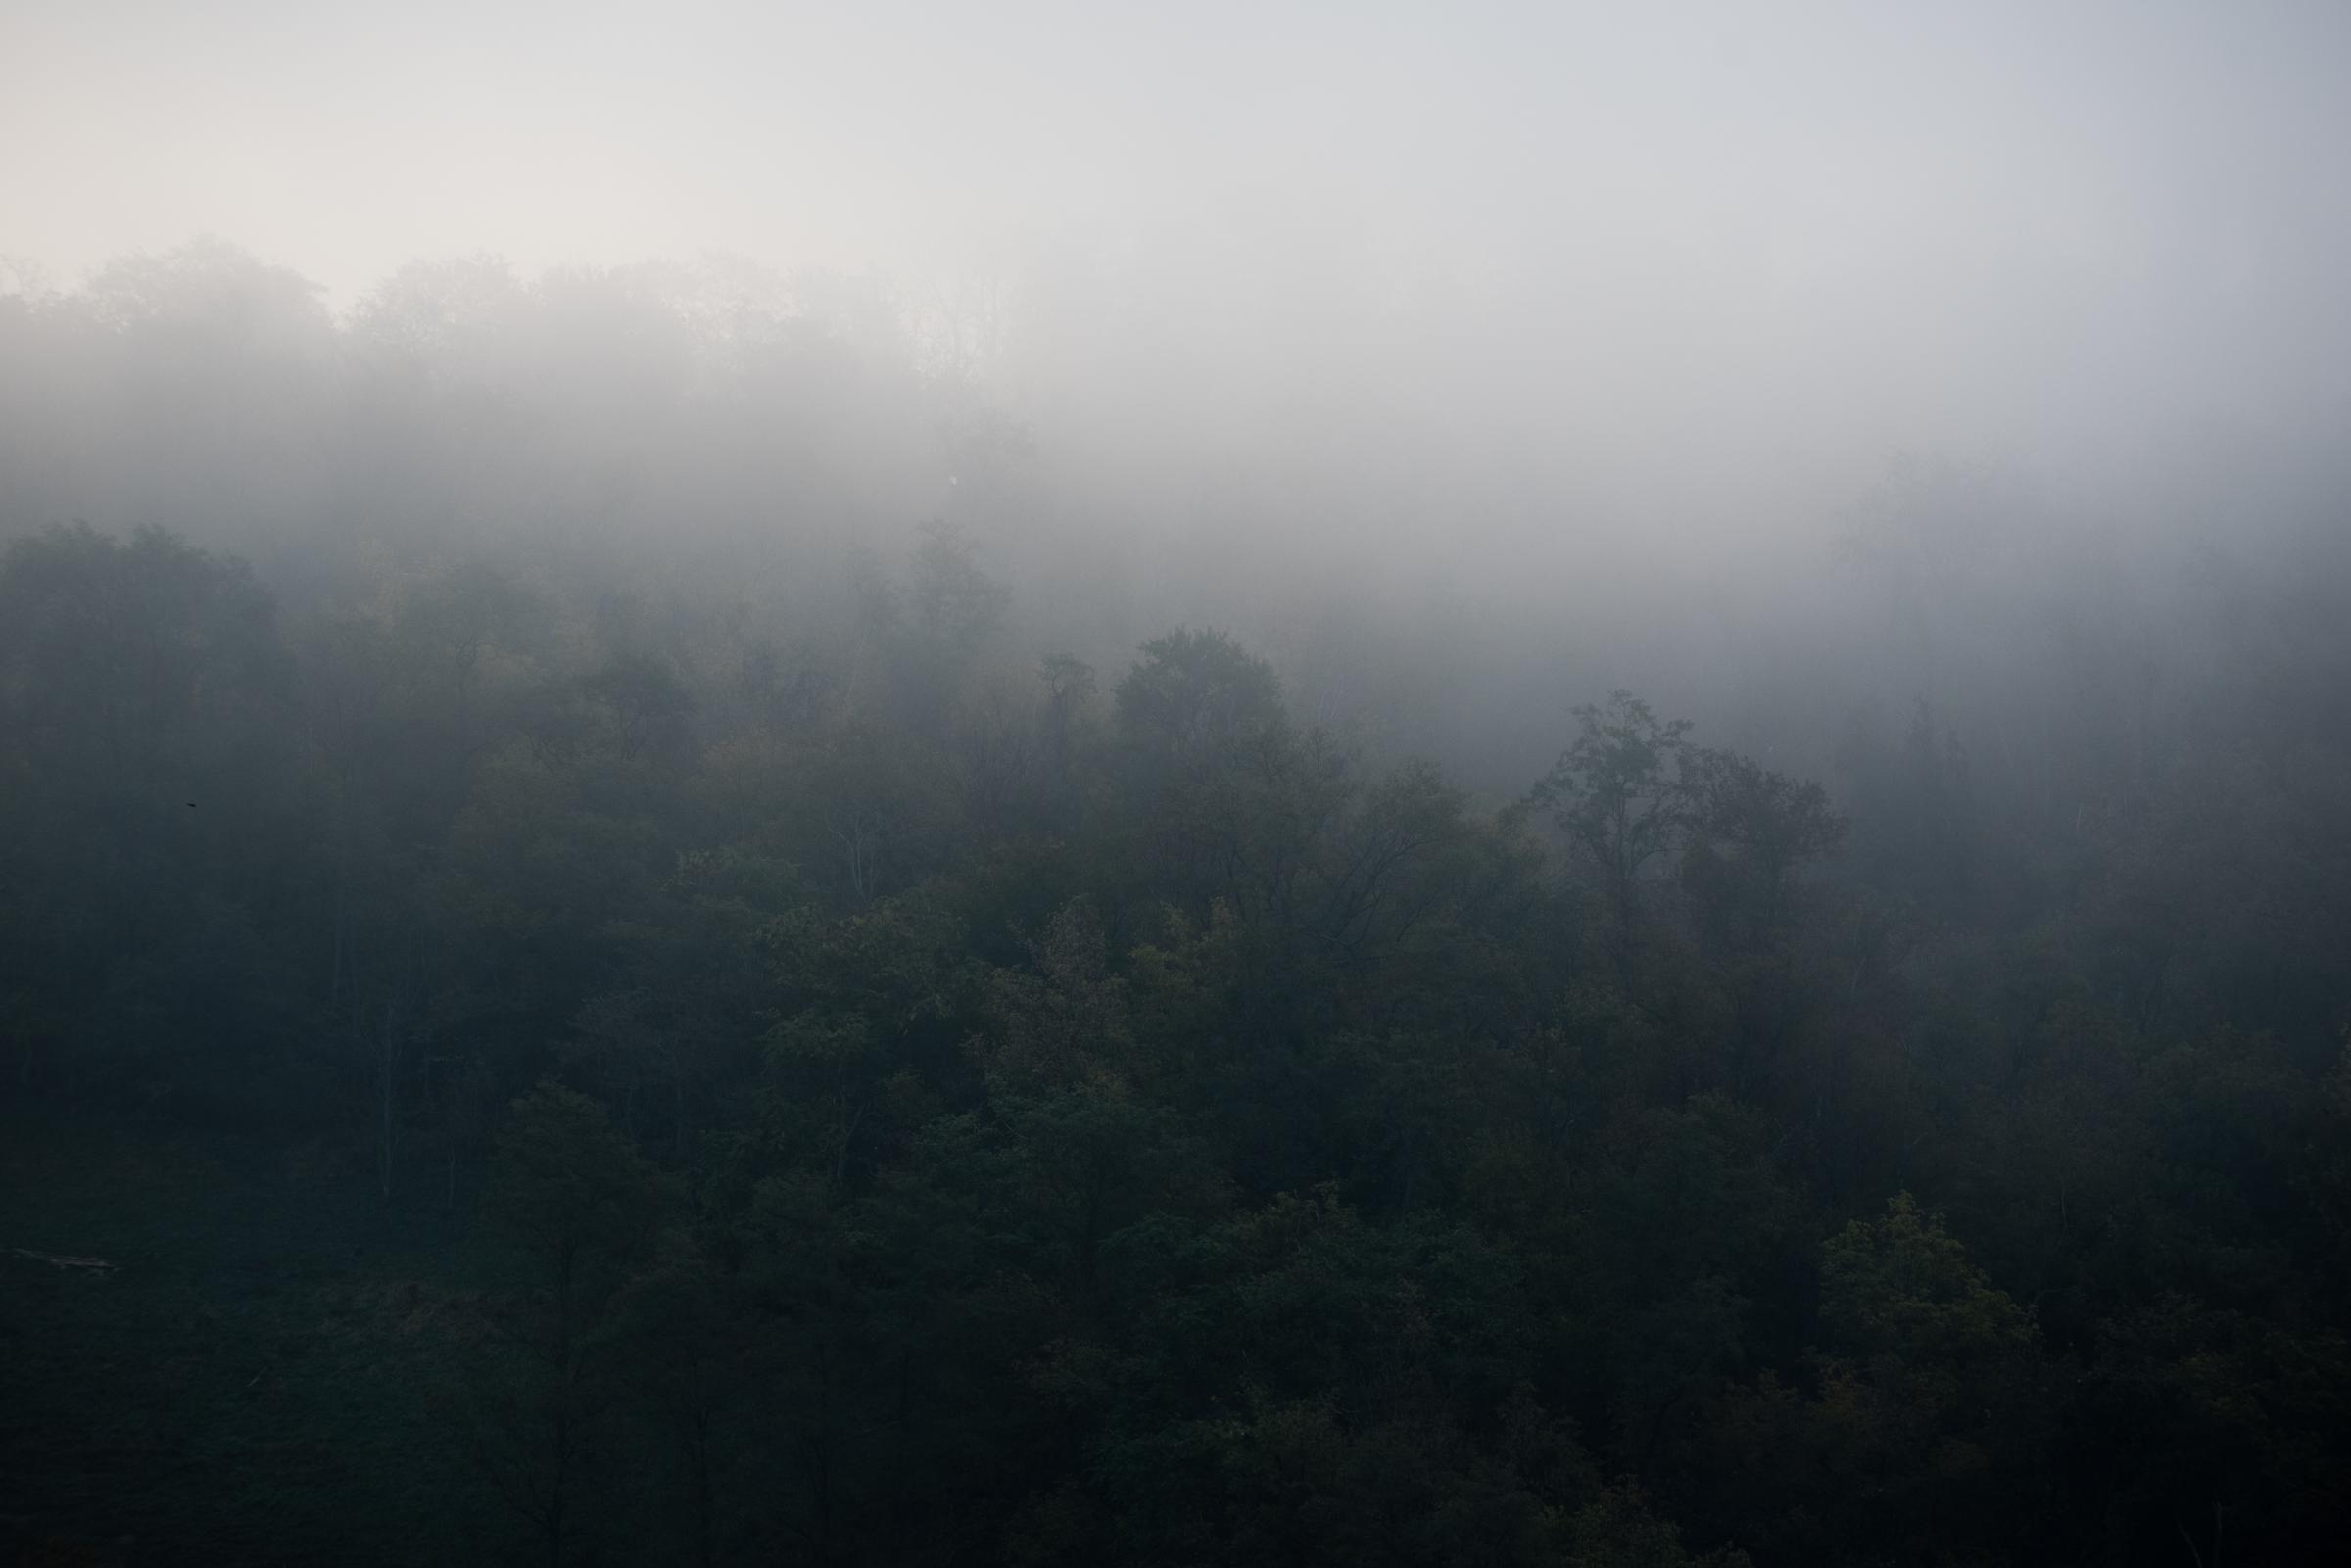 Endurance of the Spirit - The fog-wreathed hills of the unglaciated Allegheny...